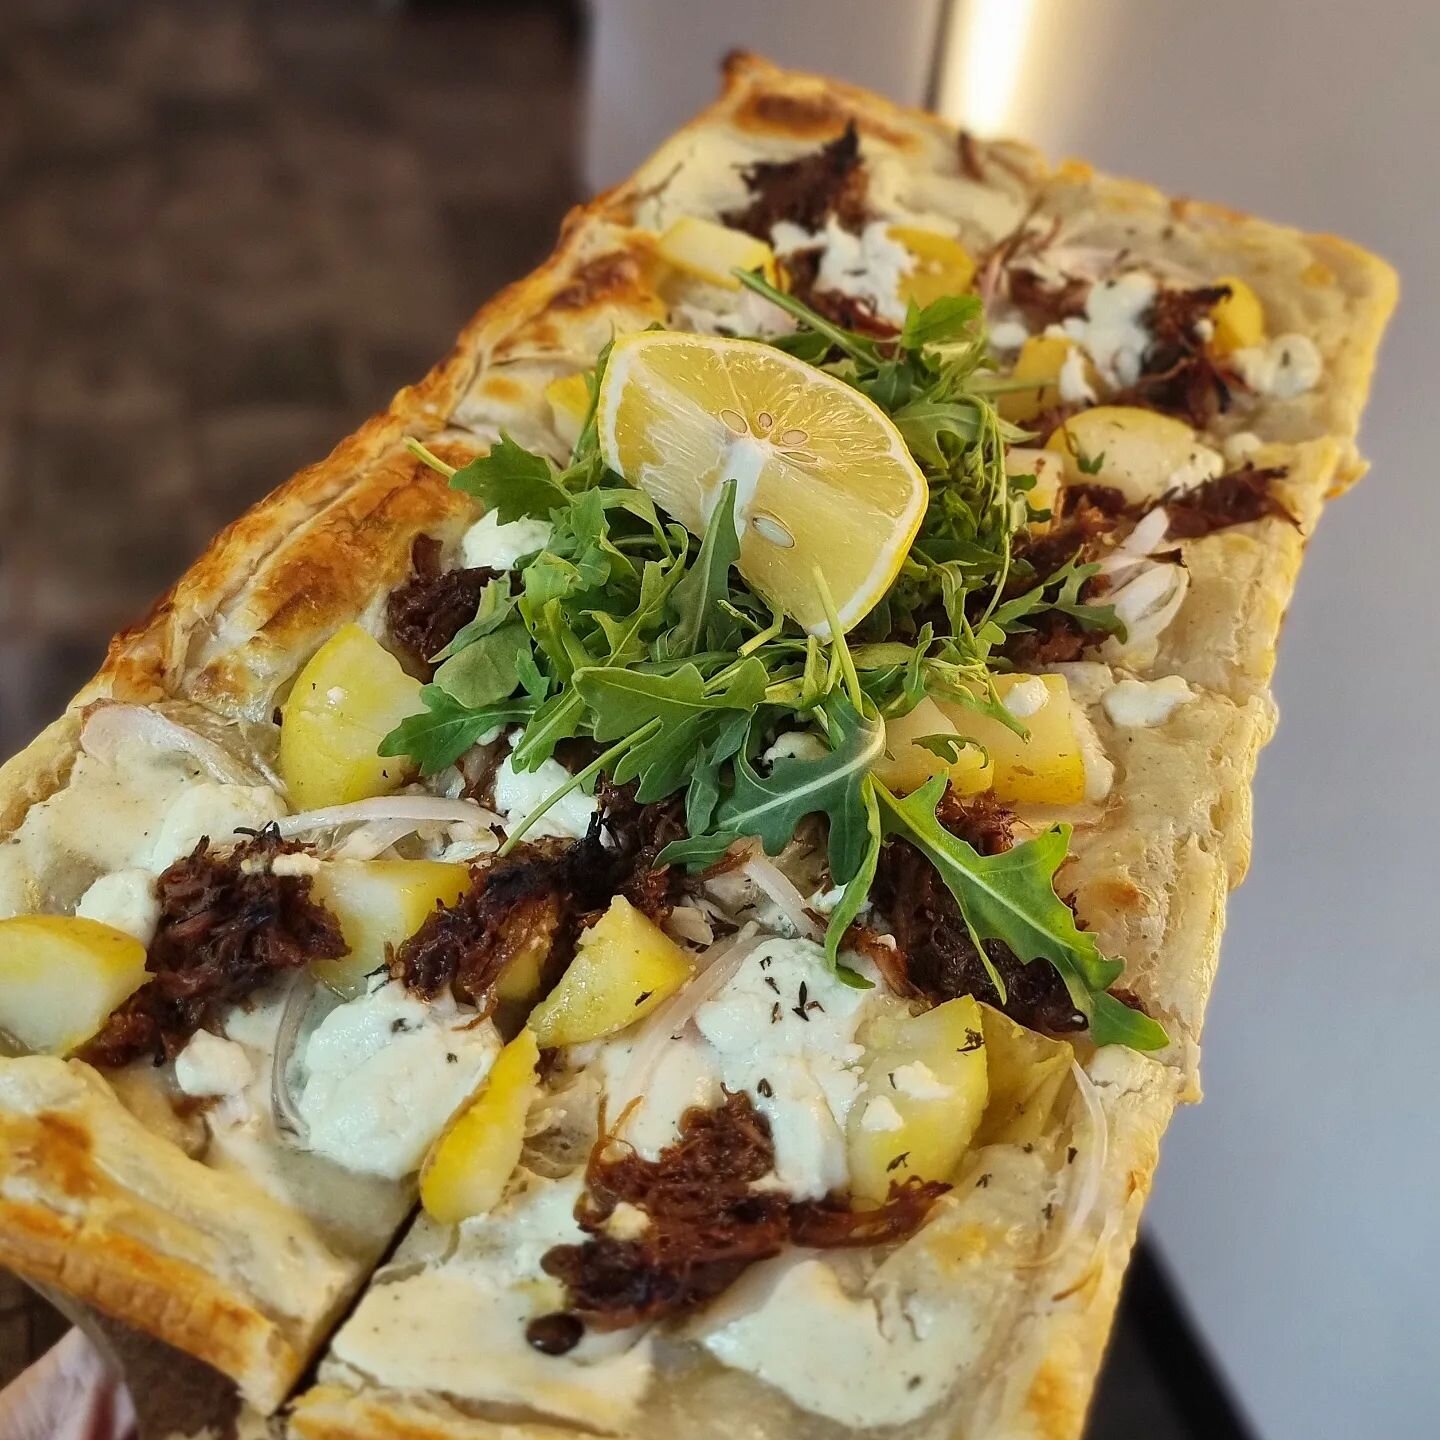 Topping of the week 🤌🏼🤤 - 'THE SOUV'

✔️ Pulled Lamb
✔️ Sliced Potato
✔️ Cr&eacute;me Fraiche
✔️ Merediths Goats Cheese
✔️ Puff Pastry Base 

= Dinner SORTED 👌🏼

#sharingiscaring